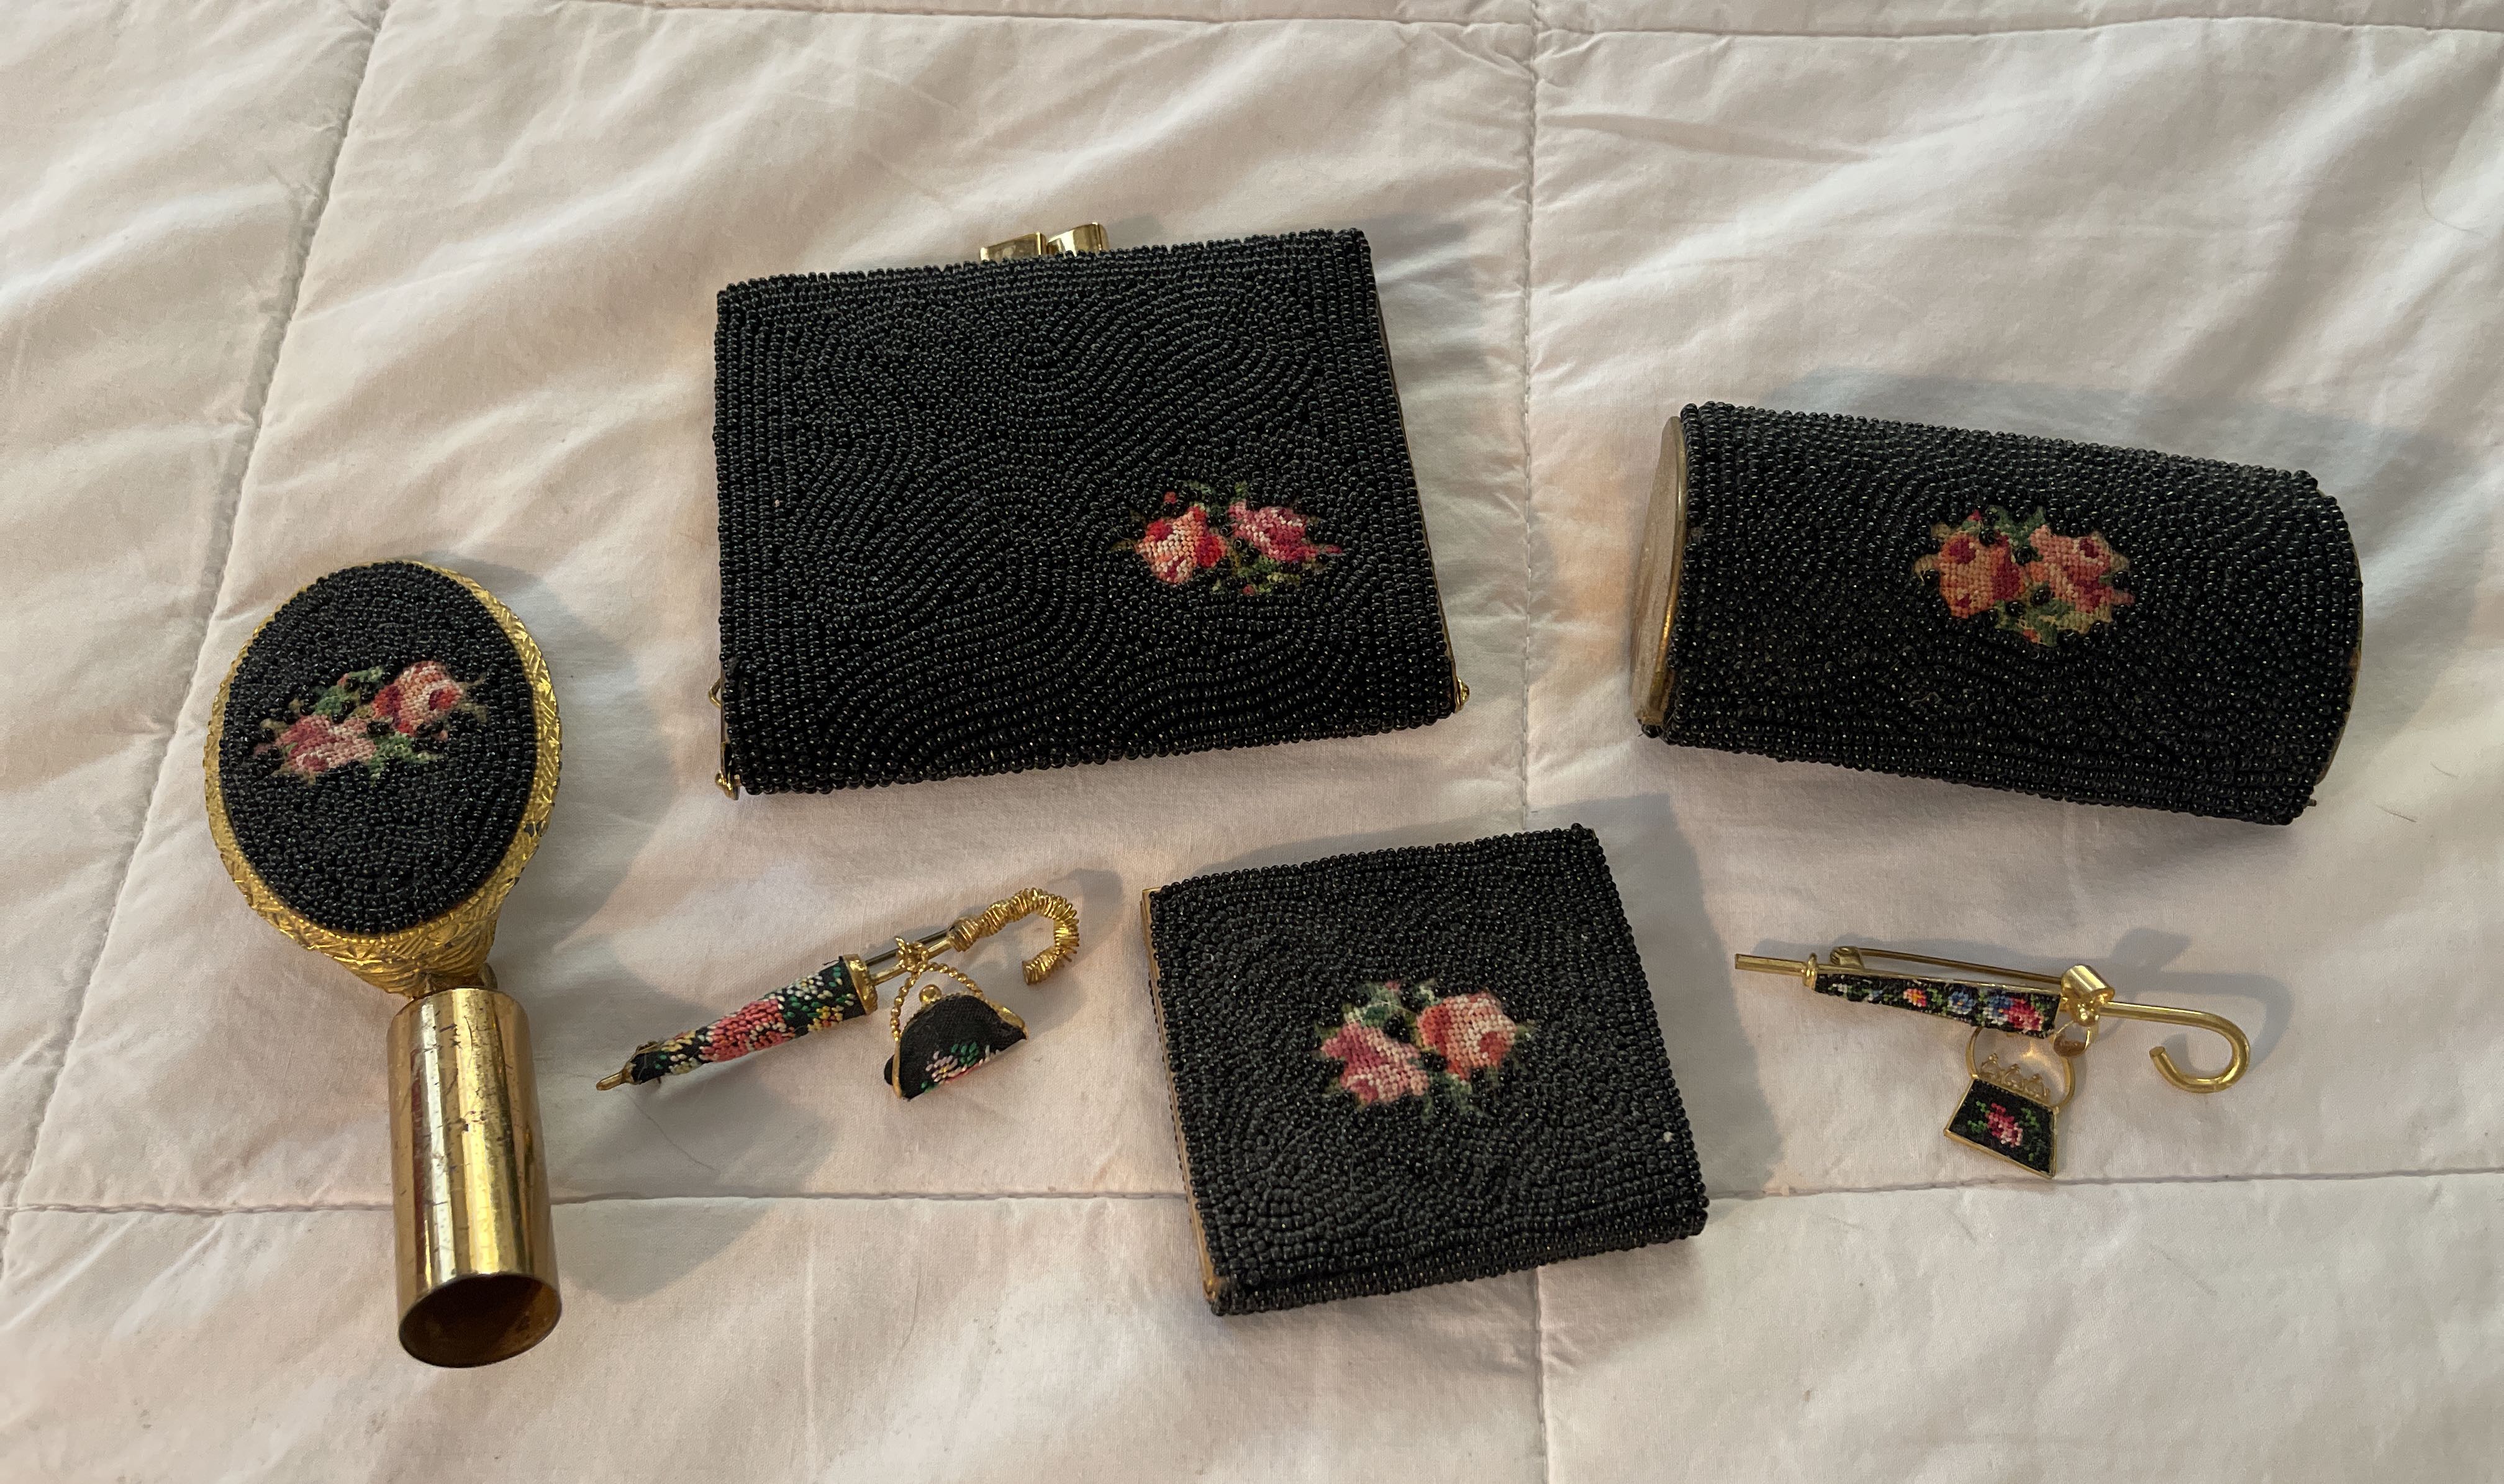 Vintage Beaded & Needlepoint Floral Purse France – The Jewelry Lady's Store